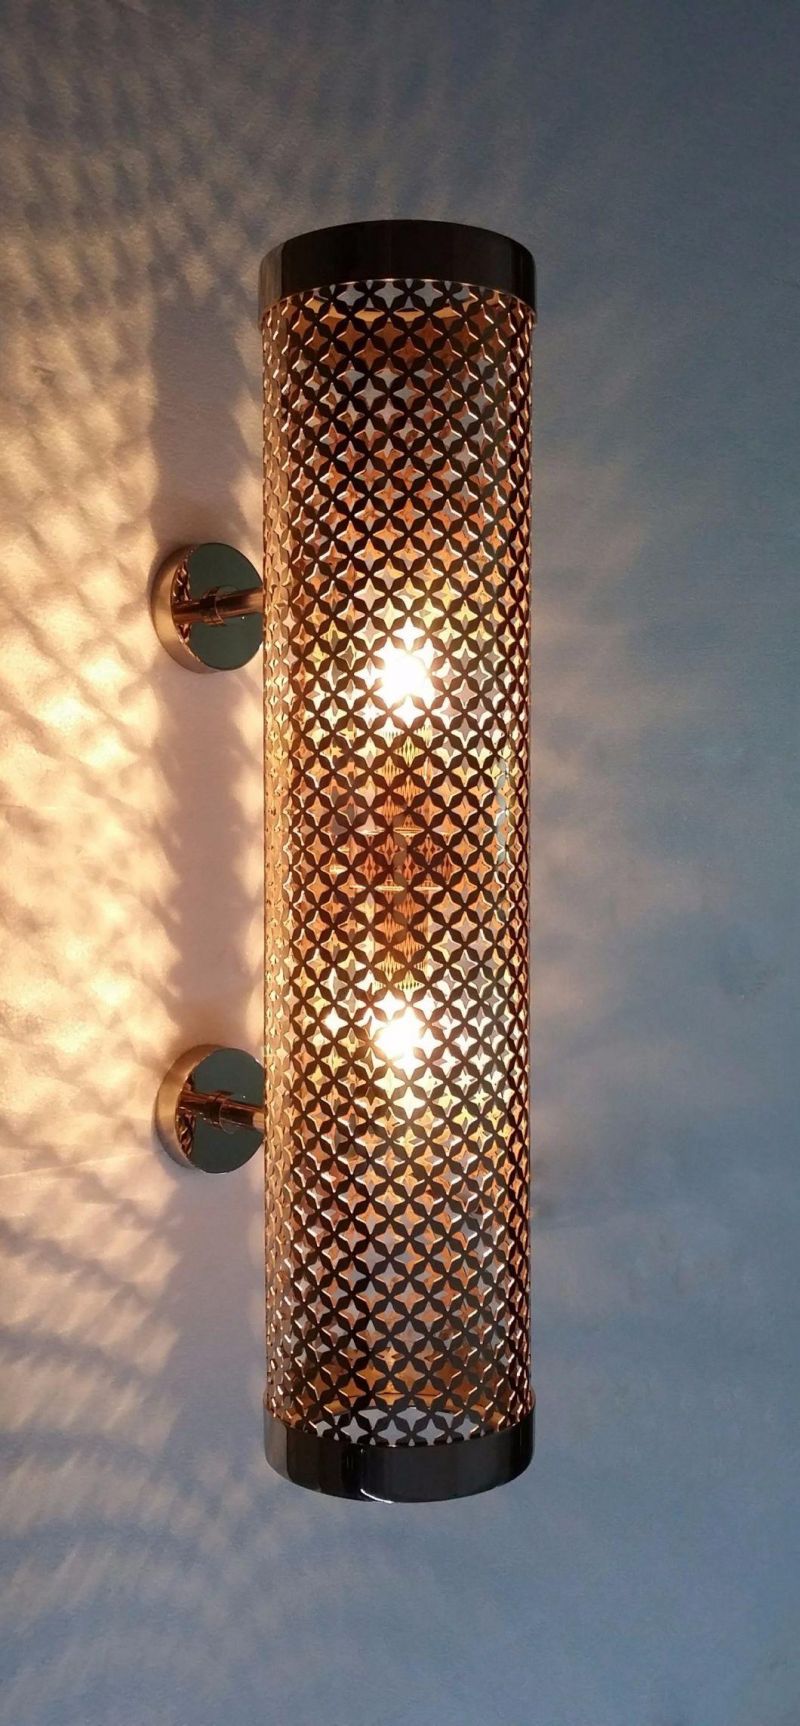 Bespoke Stainless Steel Laser Cut Star Pattern Incandescent Wall Lamp Wall Sconces